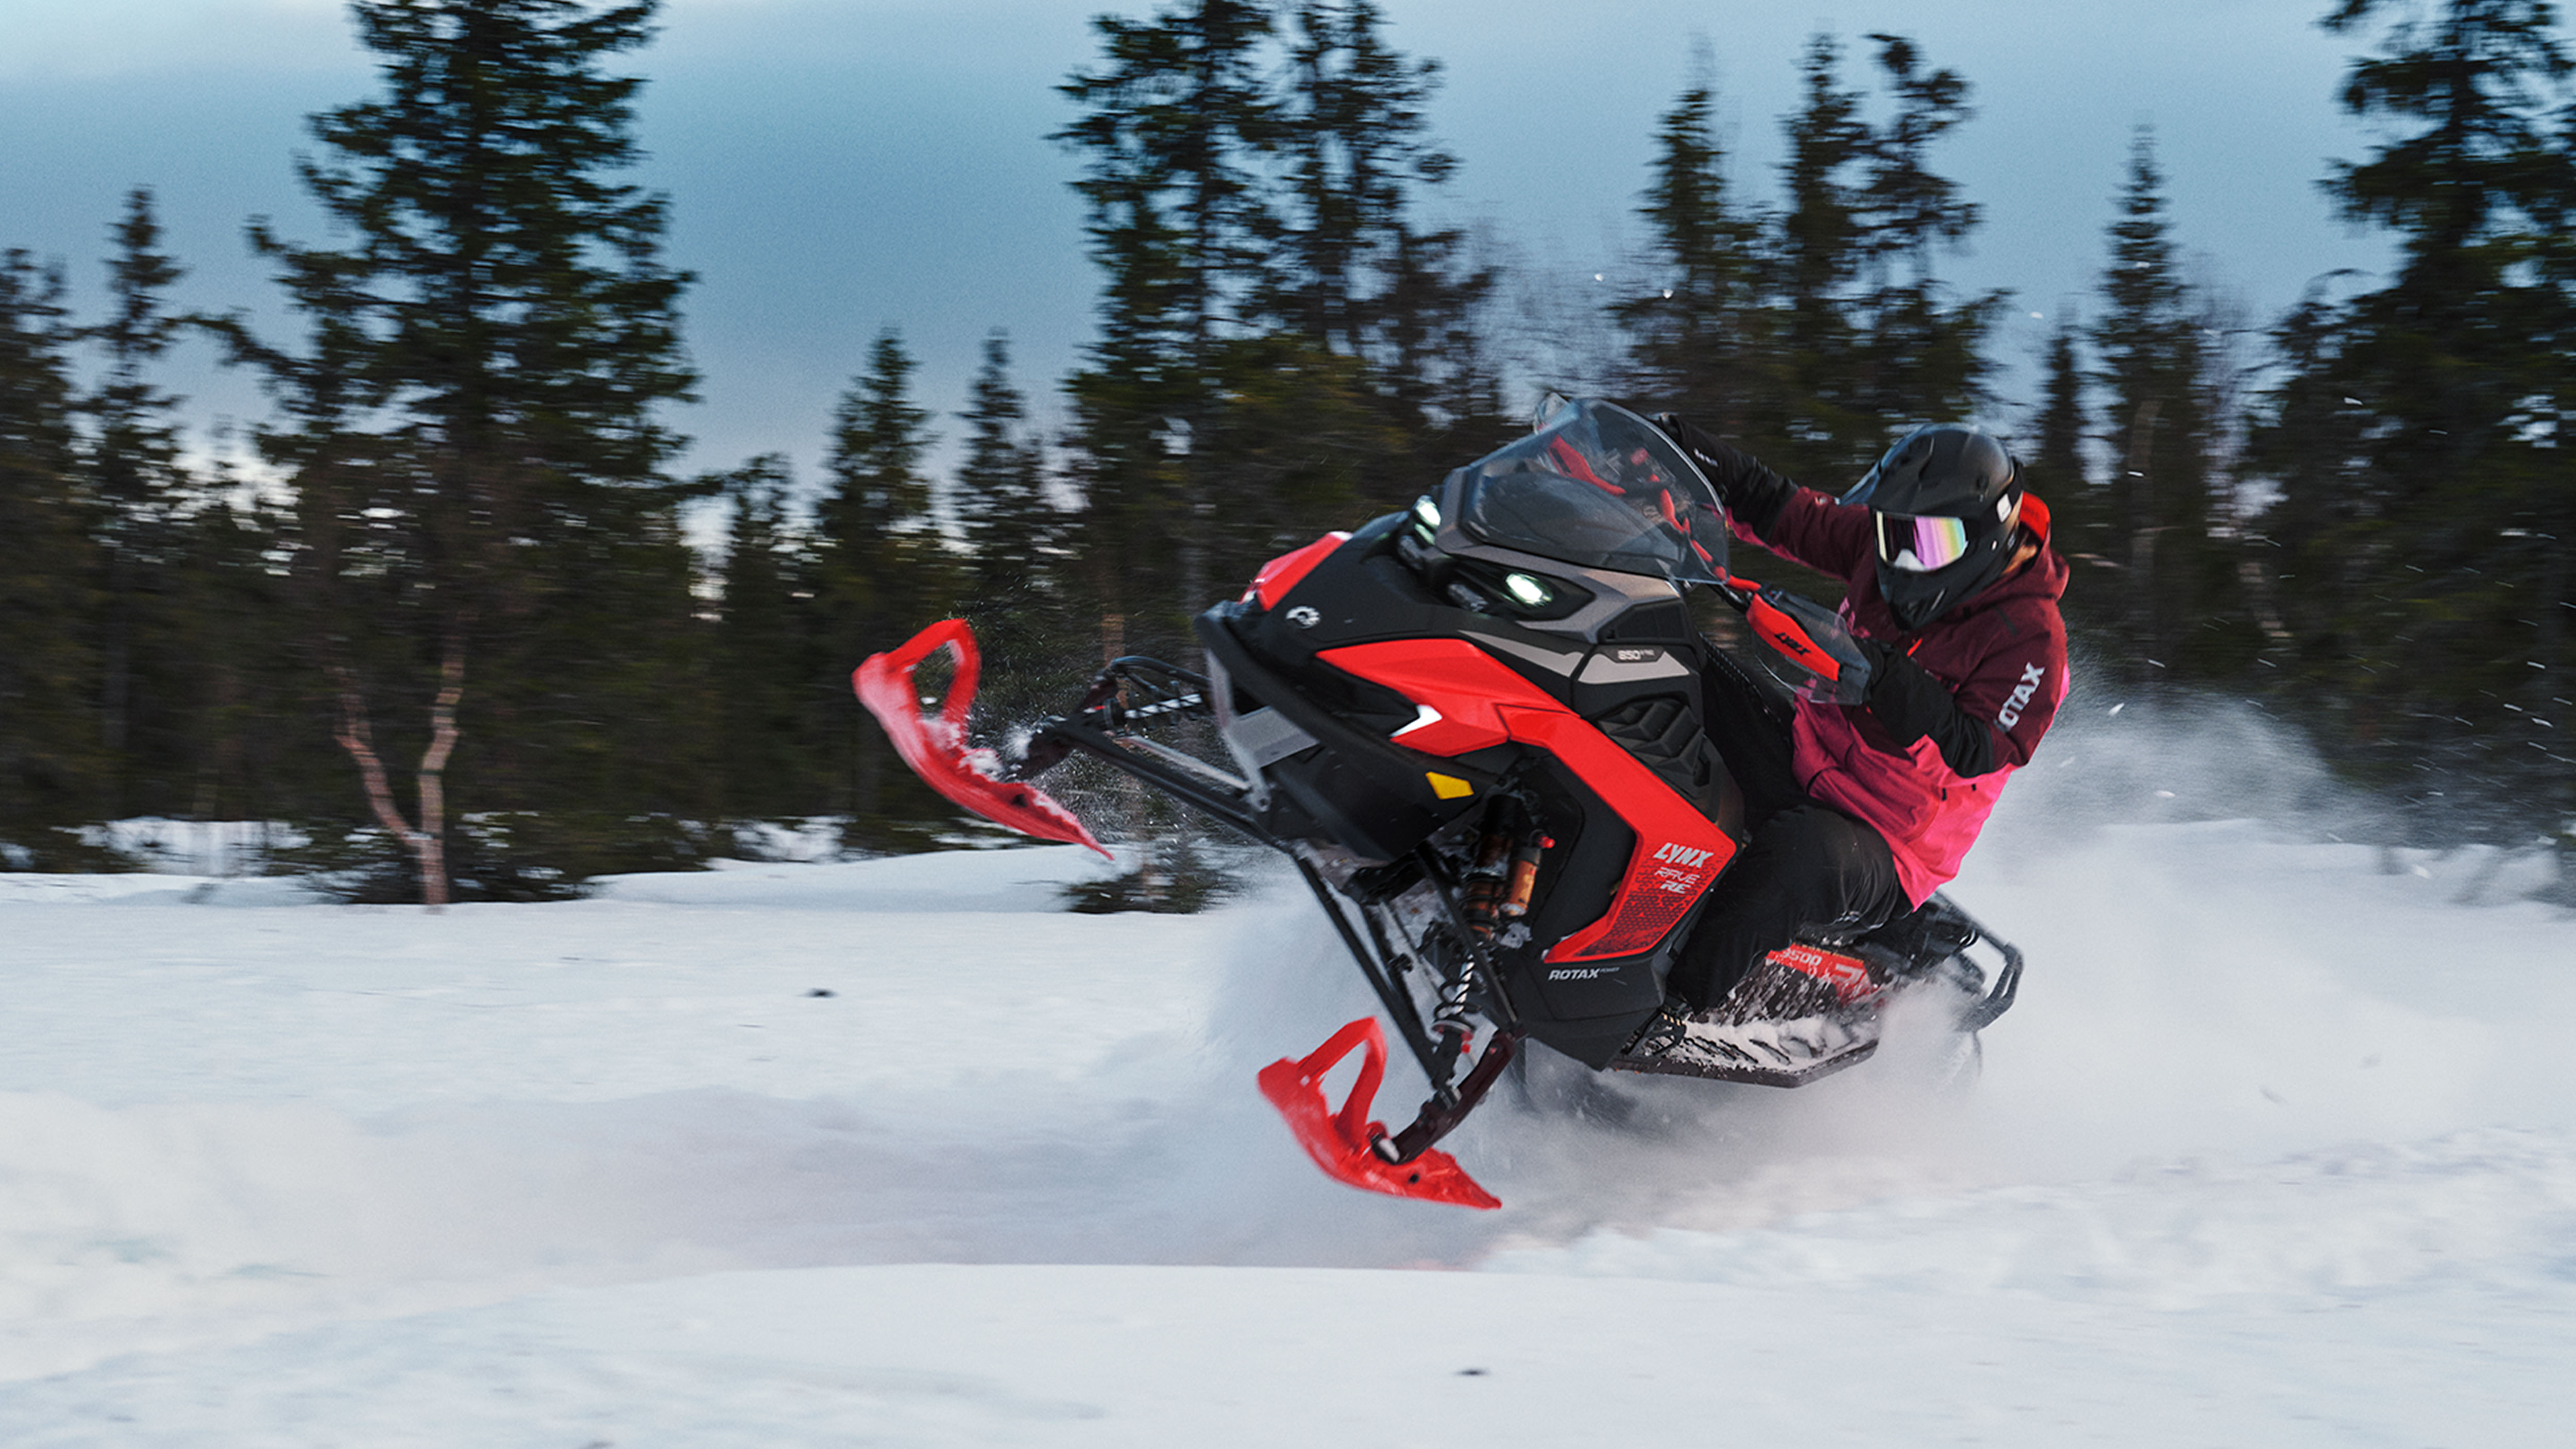 Lynx Rave RE 2025 snowmobile accelerating on snowy trail